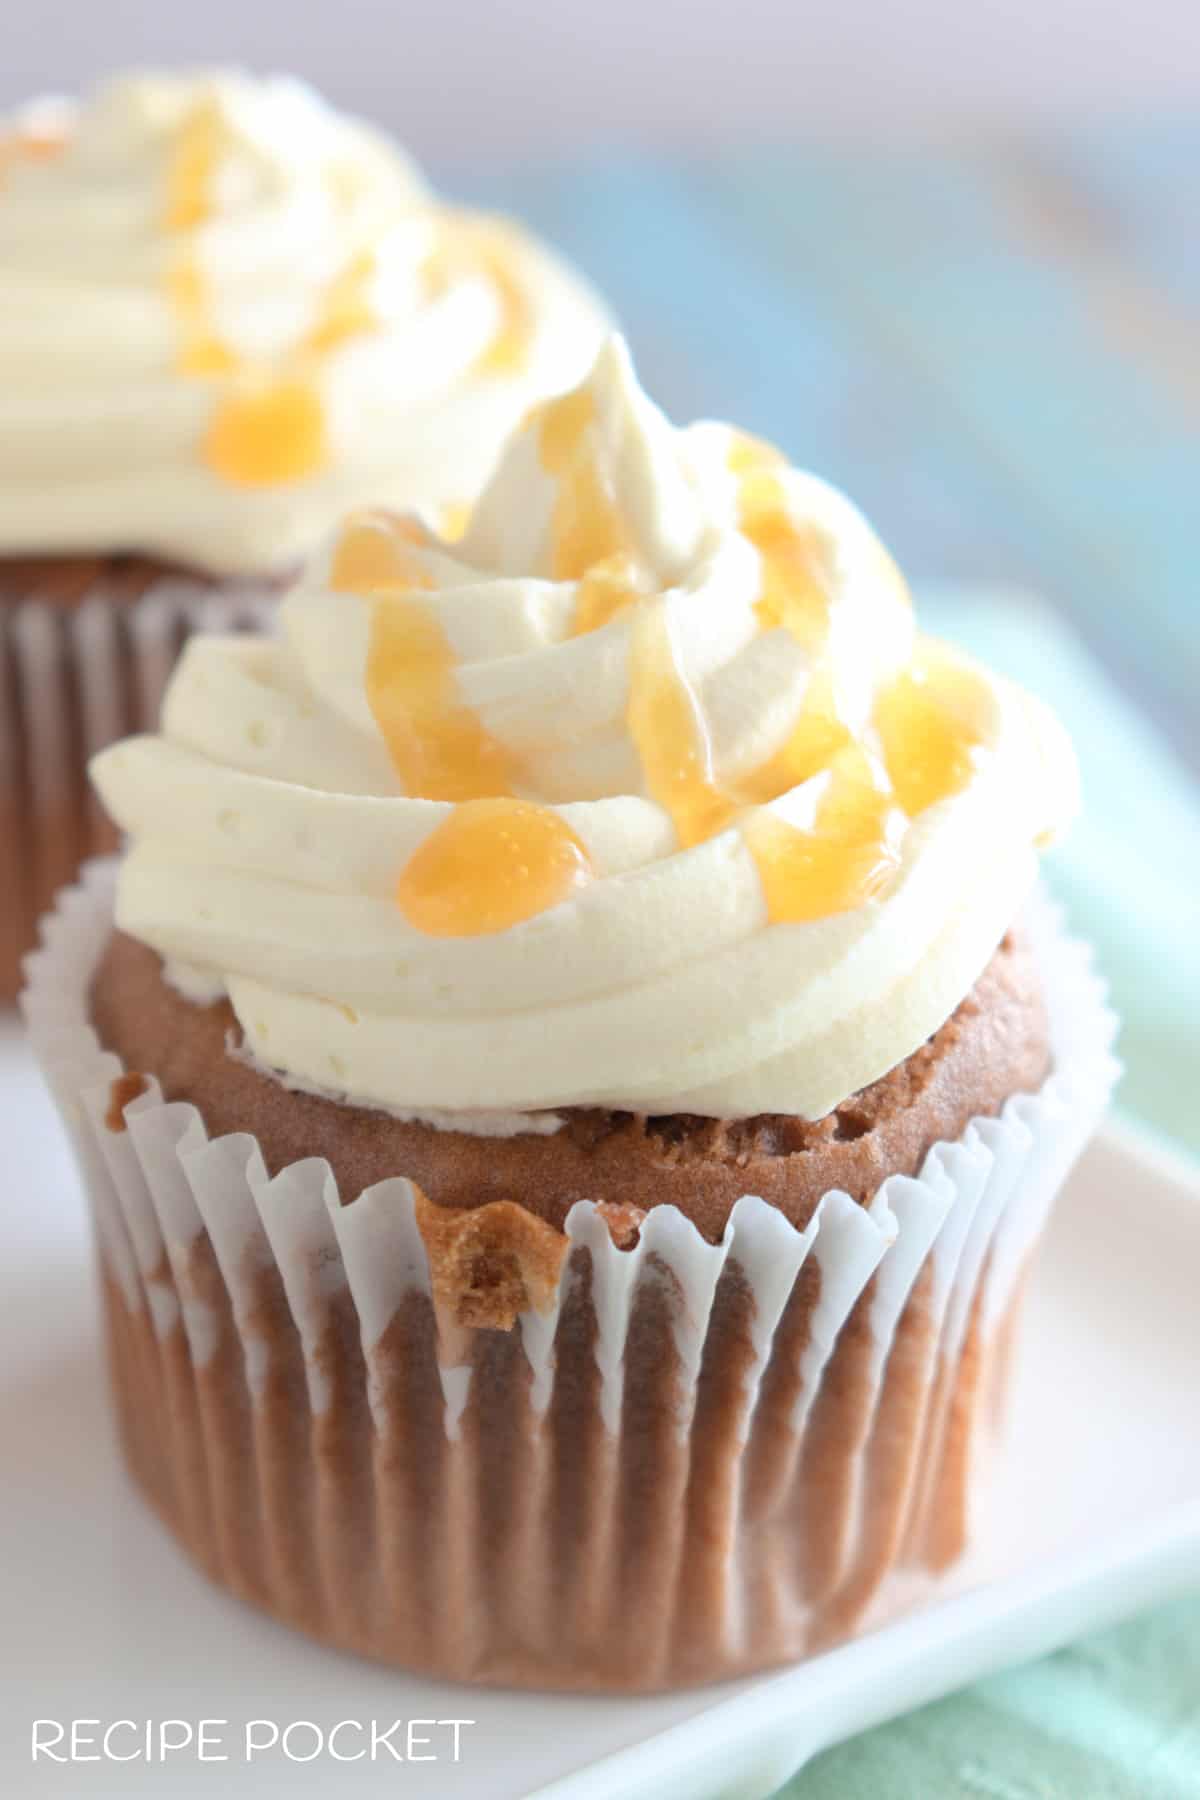 Cupcakes with whipped cream topping and caramel drizzle.